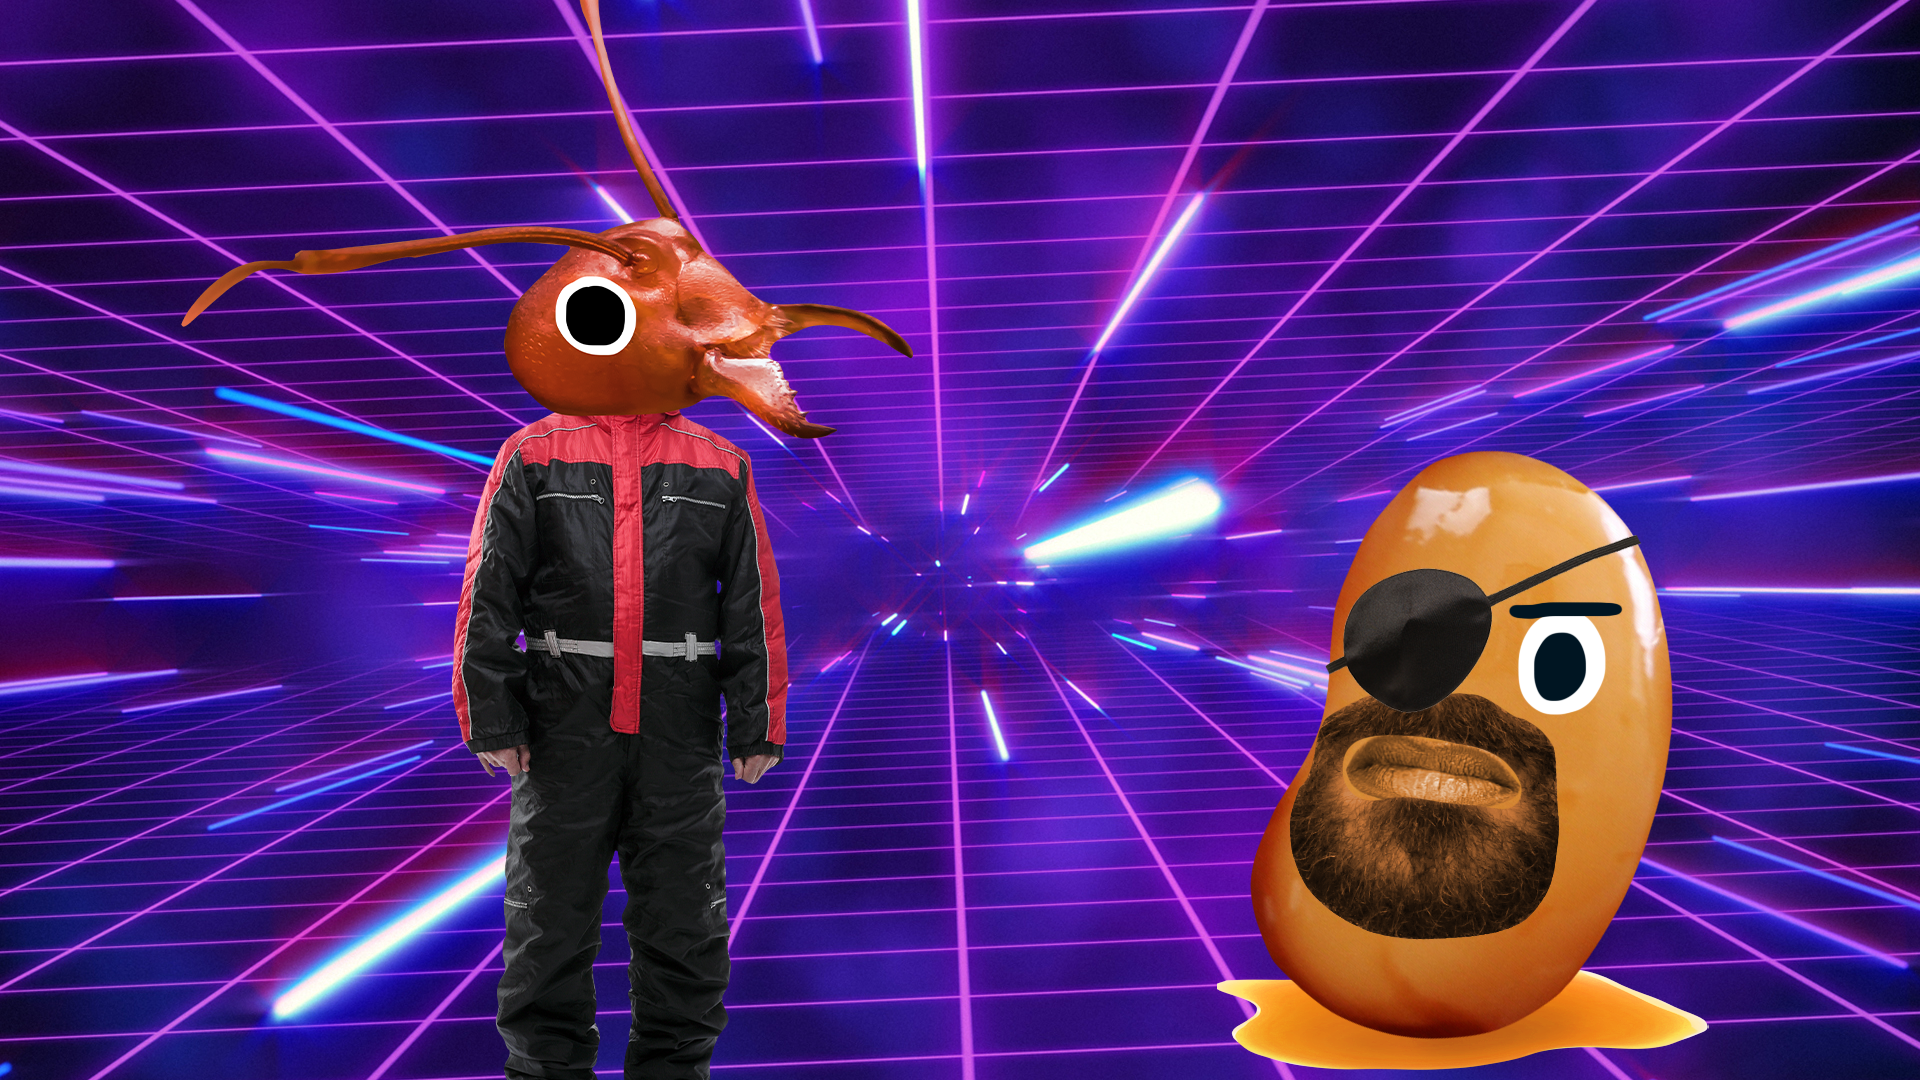 Ant man and Nick Fury baked bean on laser background